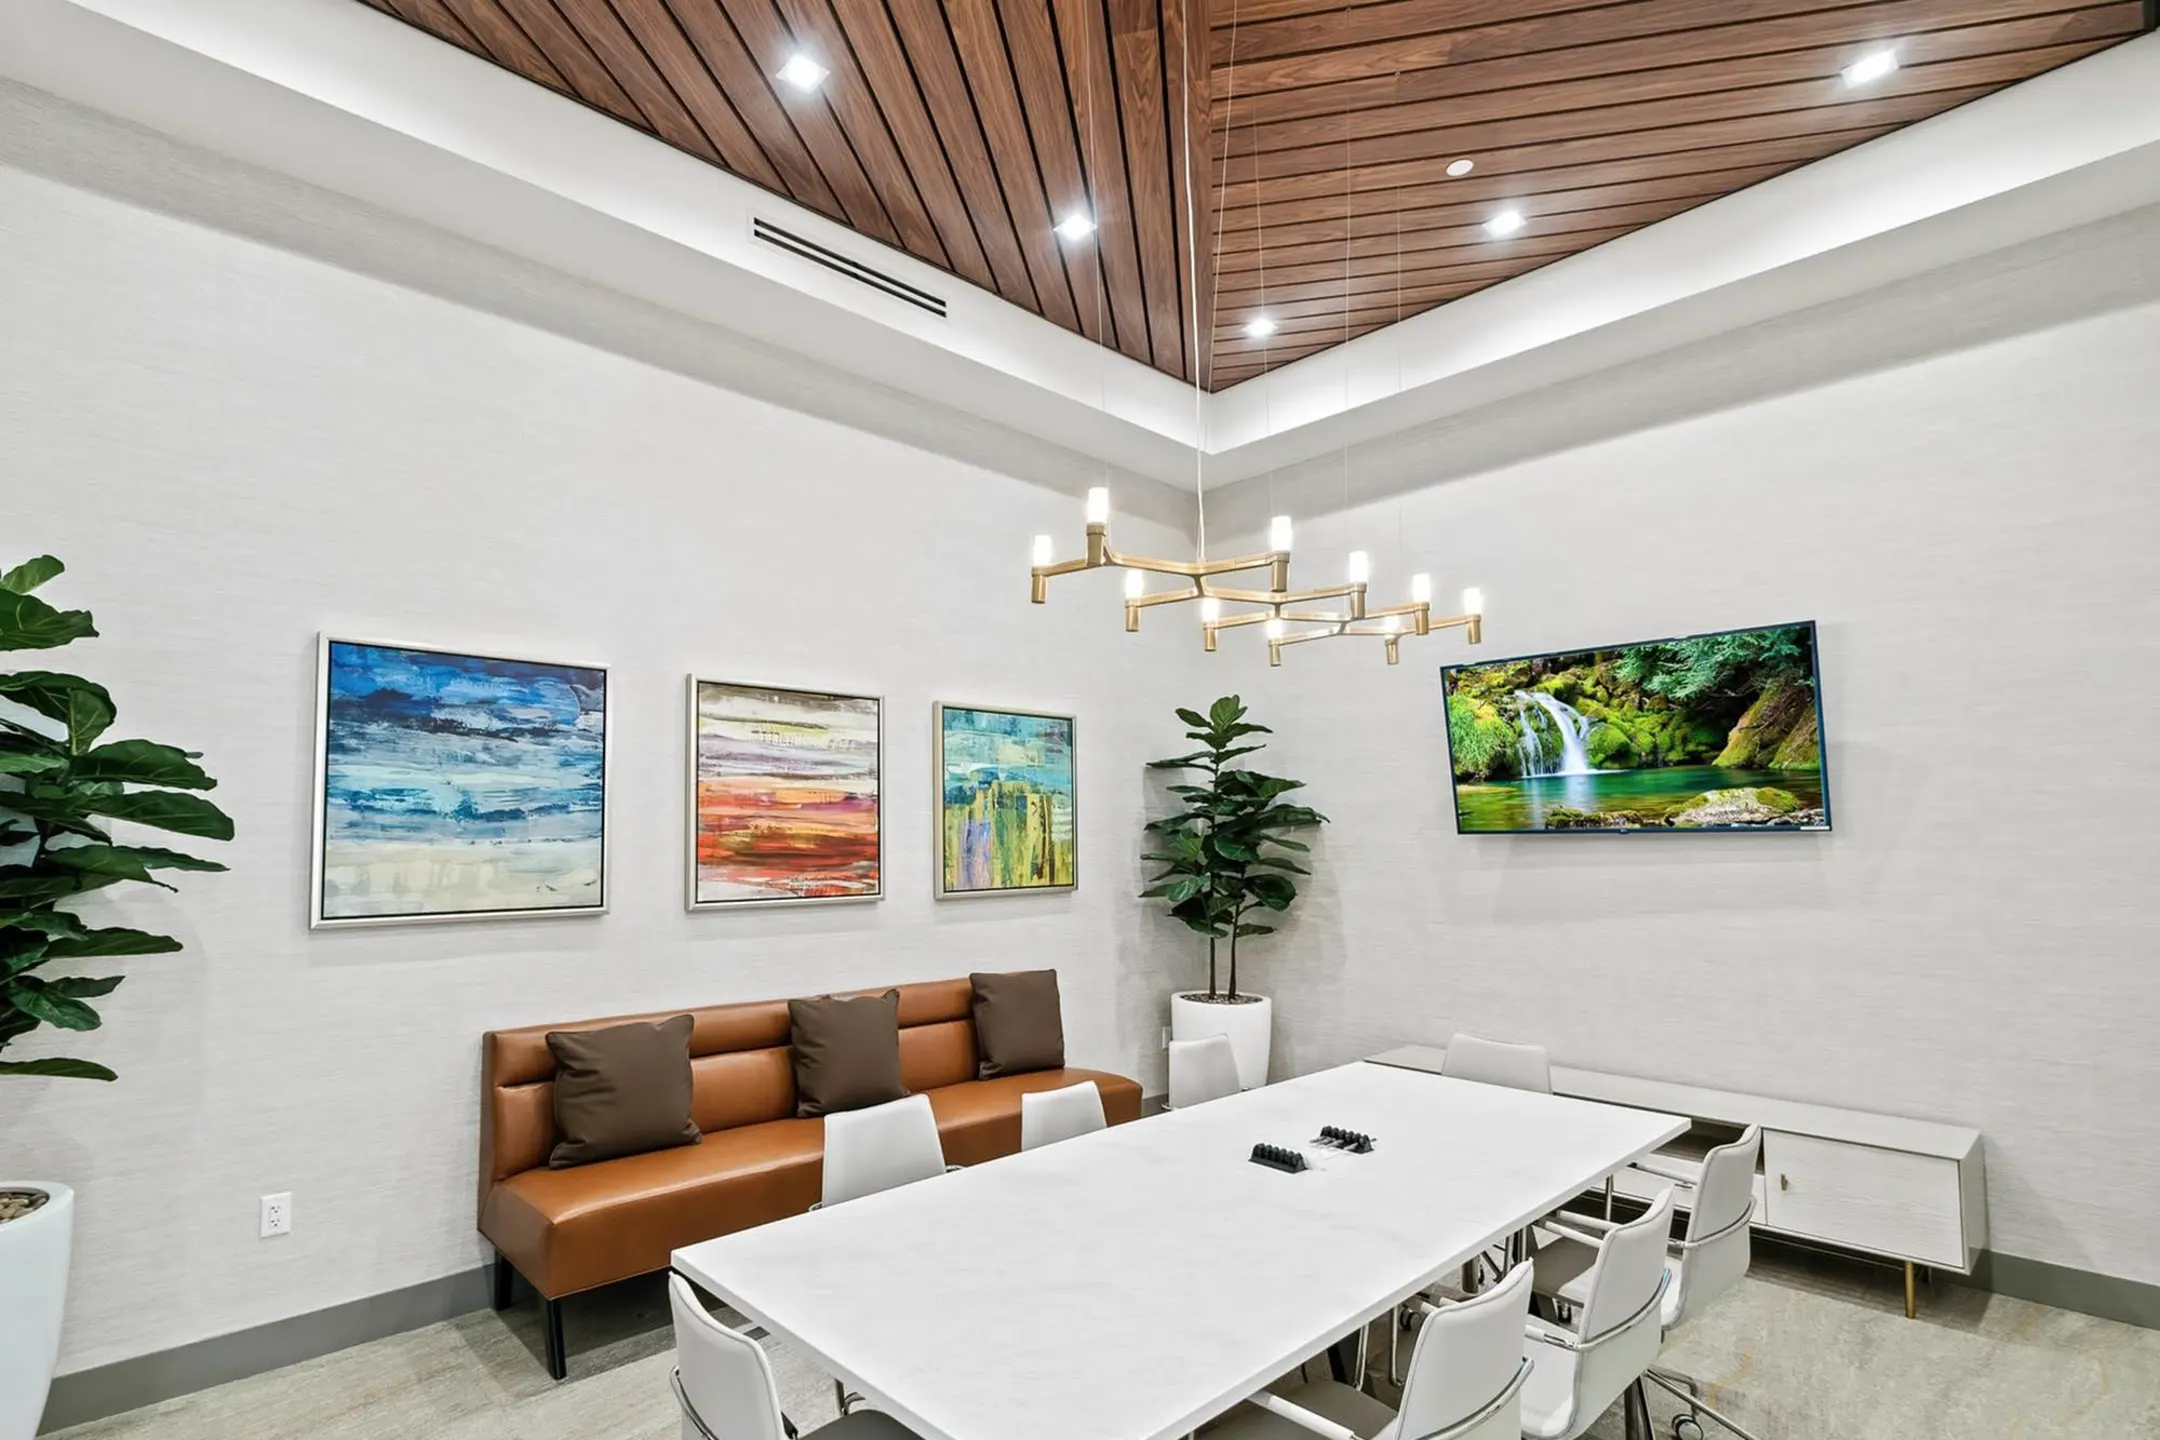 Dining Room - The Residences at Monterra Commons - 55+ Active Adult Community - Pembroke Pines, FL